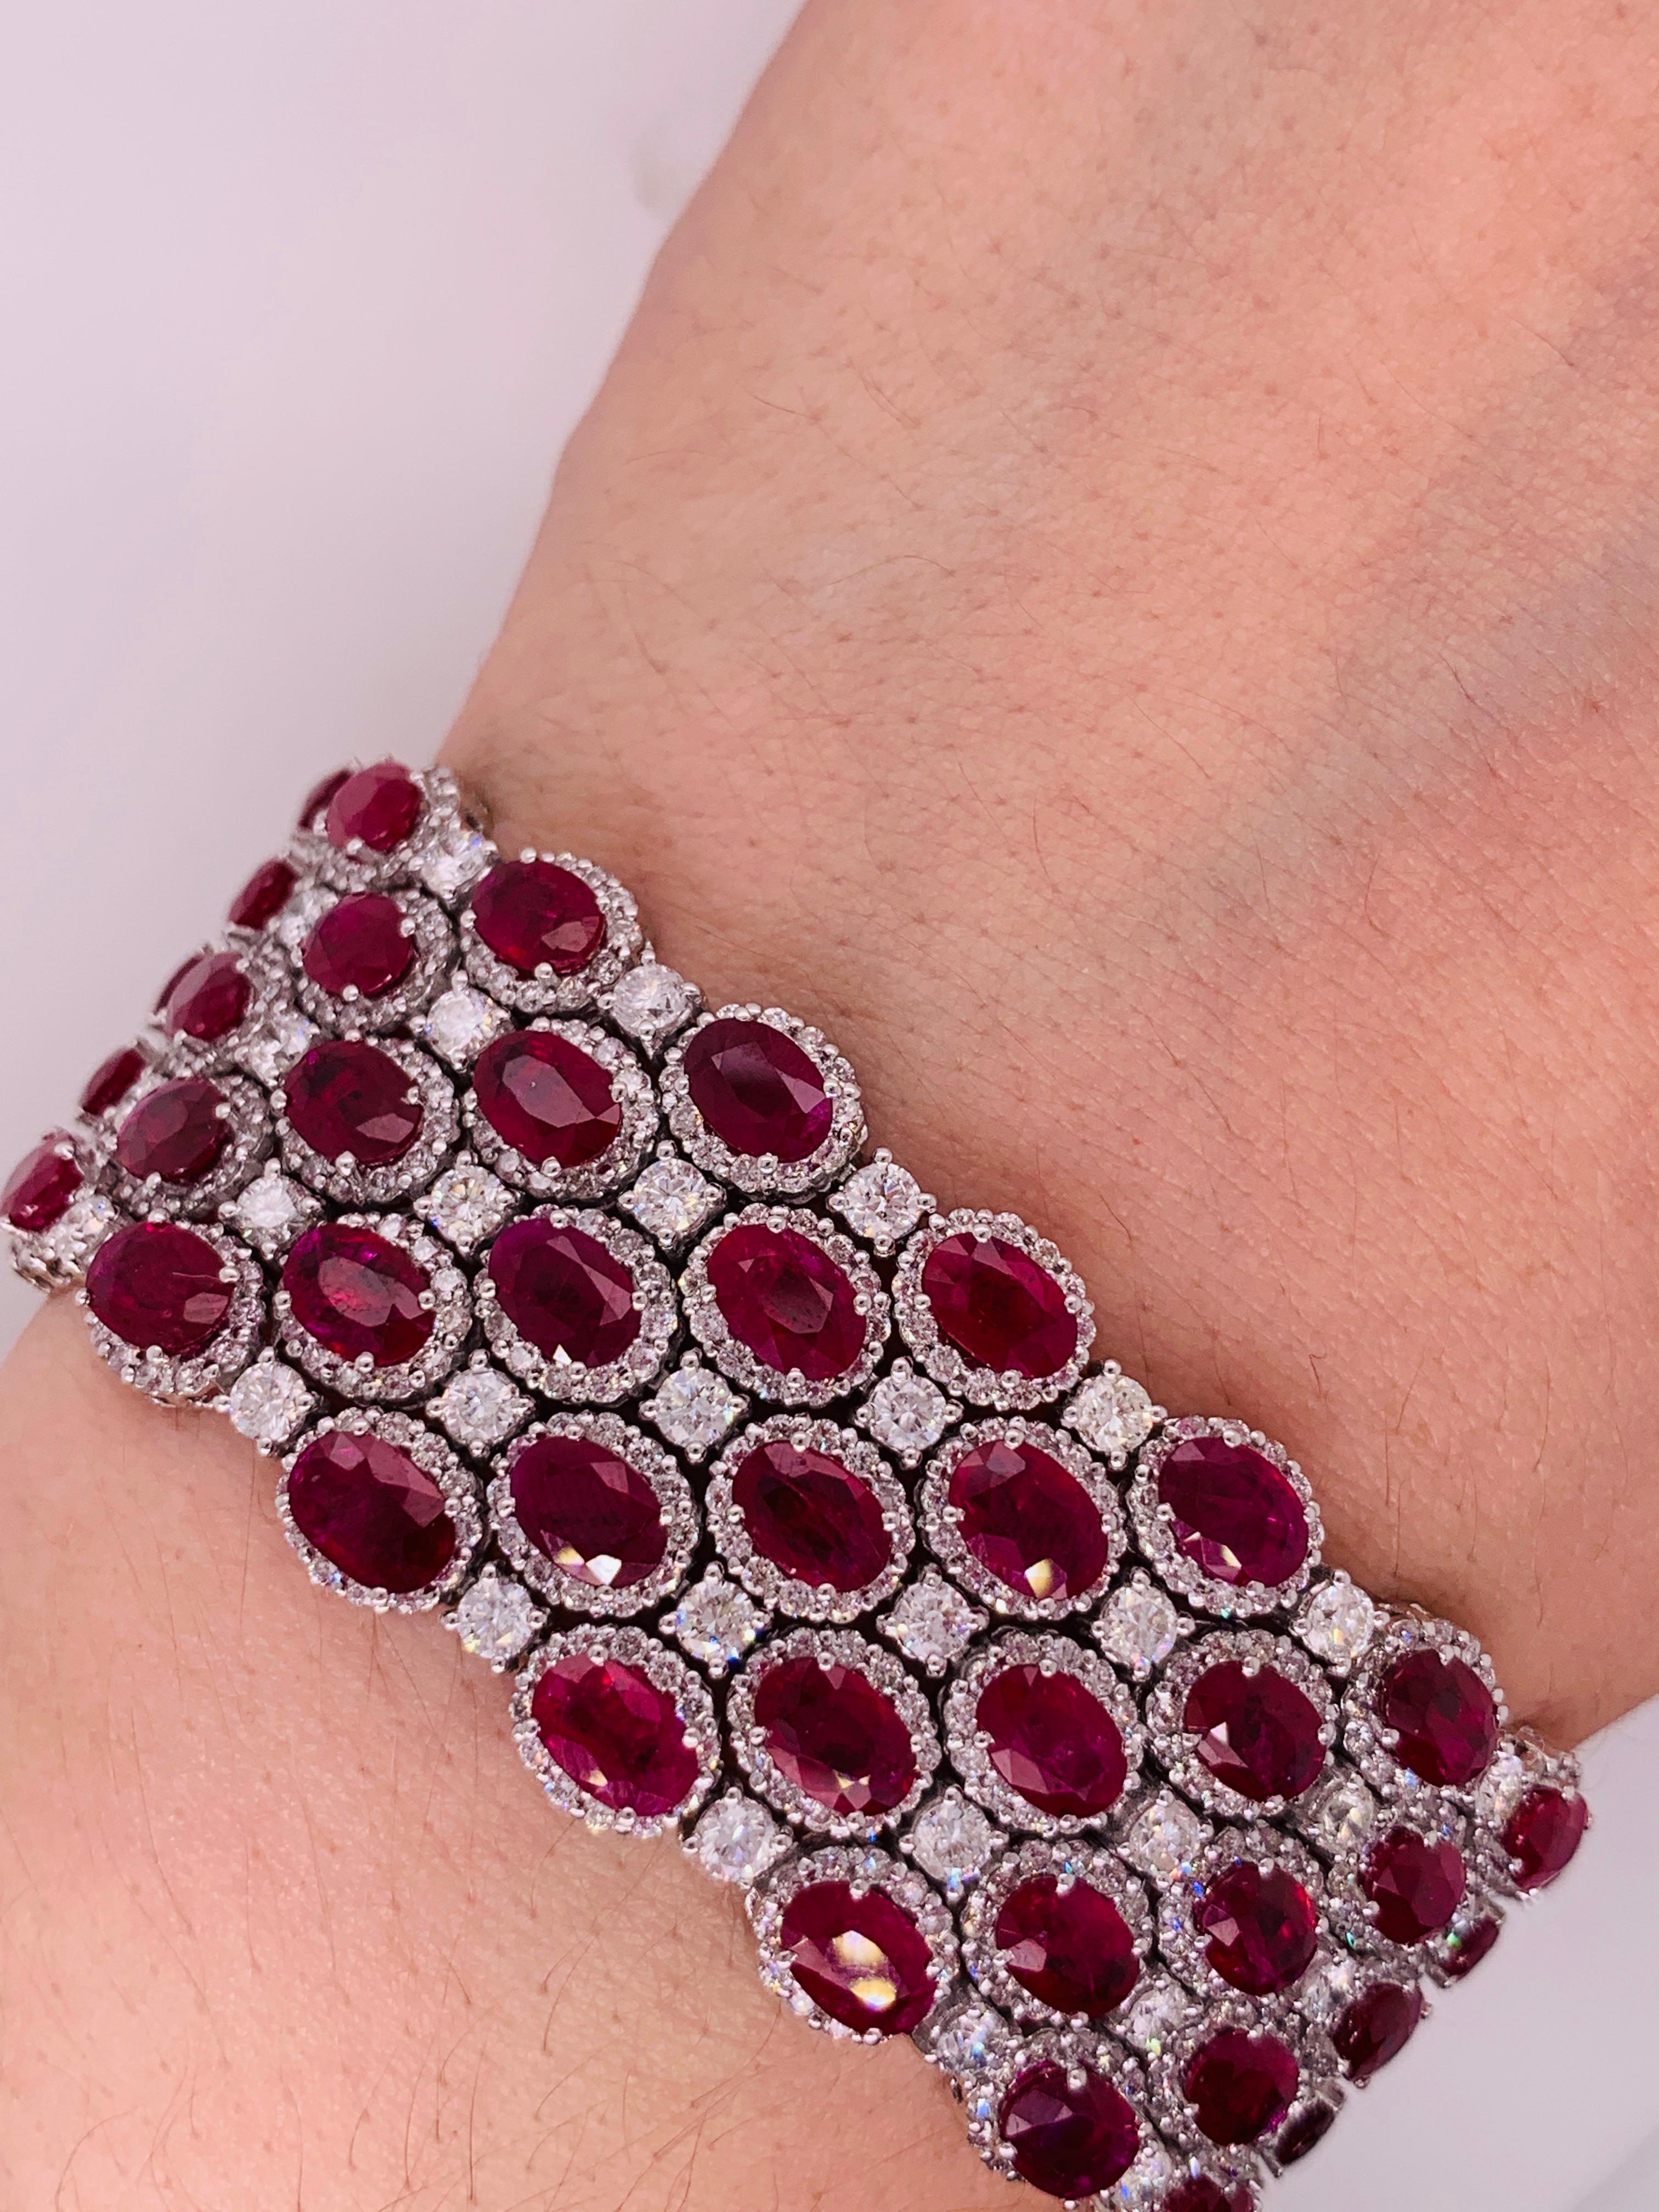 18k white gold ruby and diamonds five row bracelet. 
Gem information:
44 carats of natural rubies. 

Diamond information:
15 carats of round brilliant cut diamonds. 

G H in color SI in clarity 
